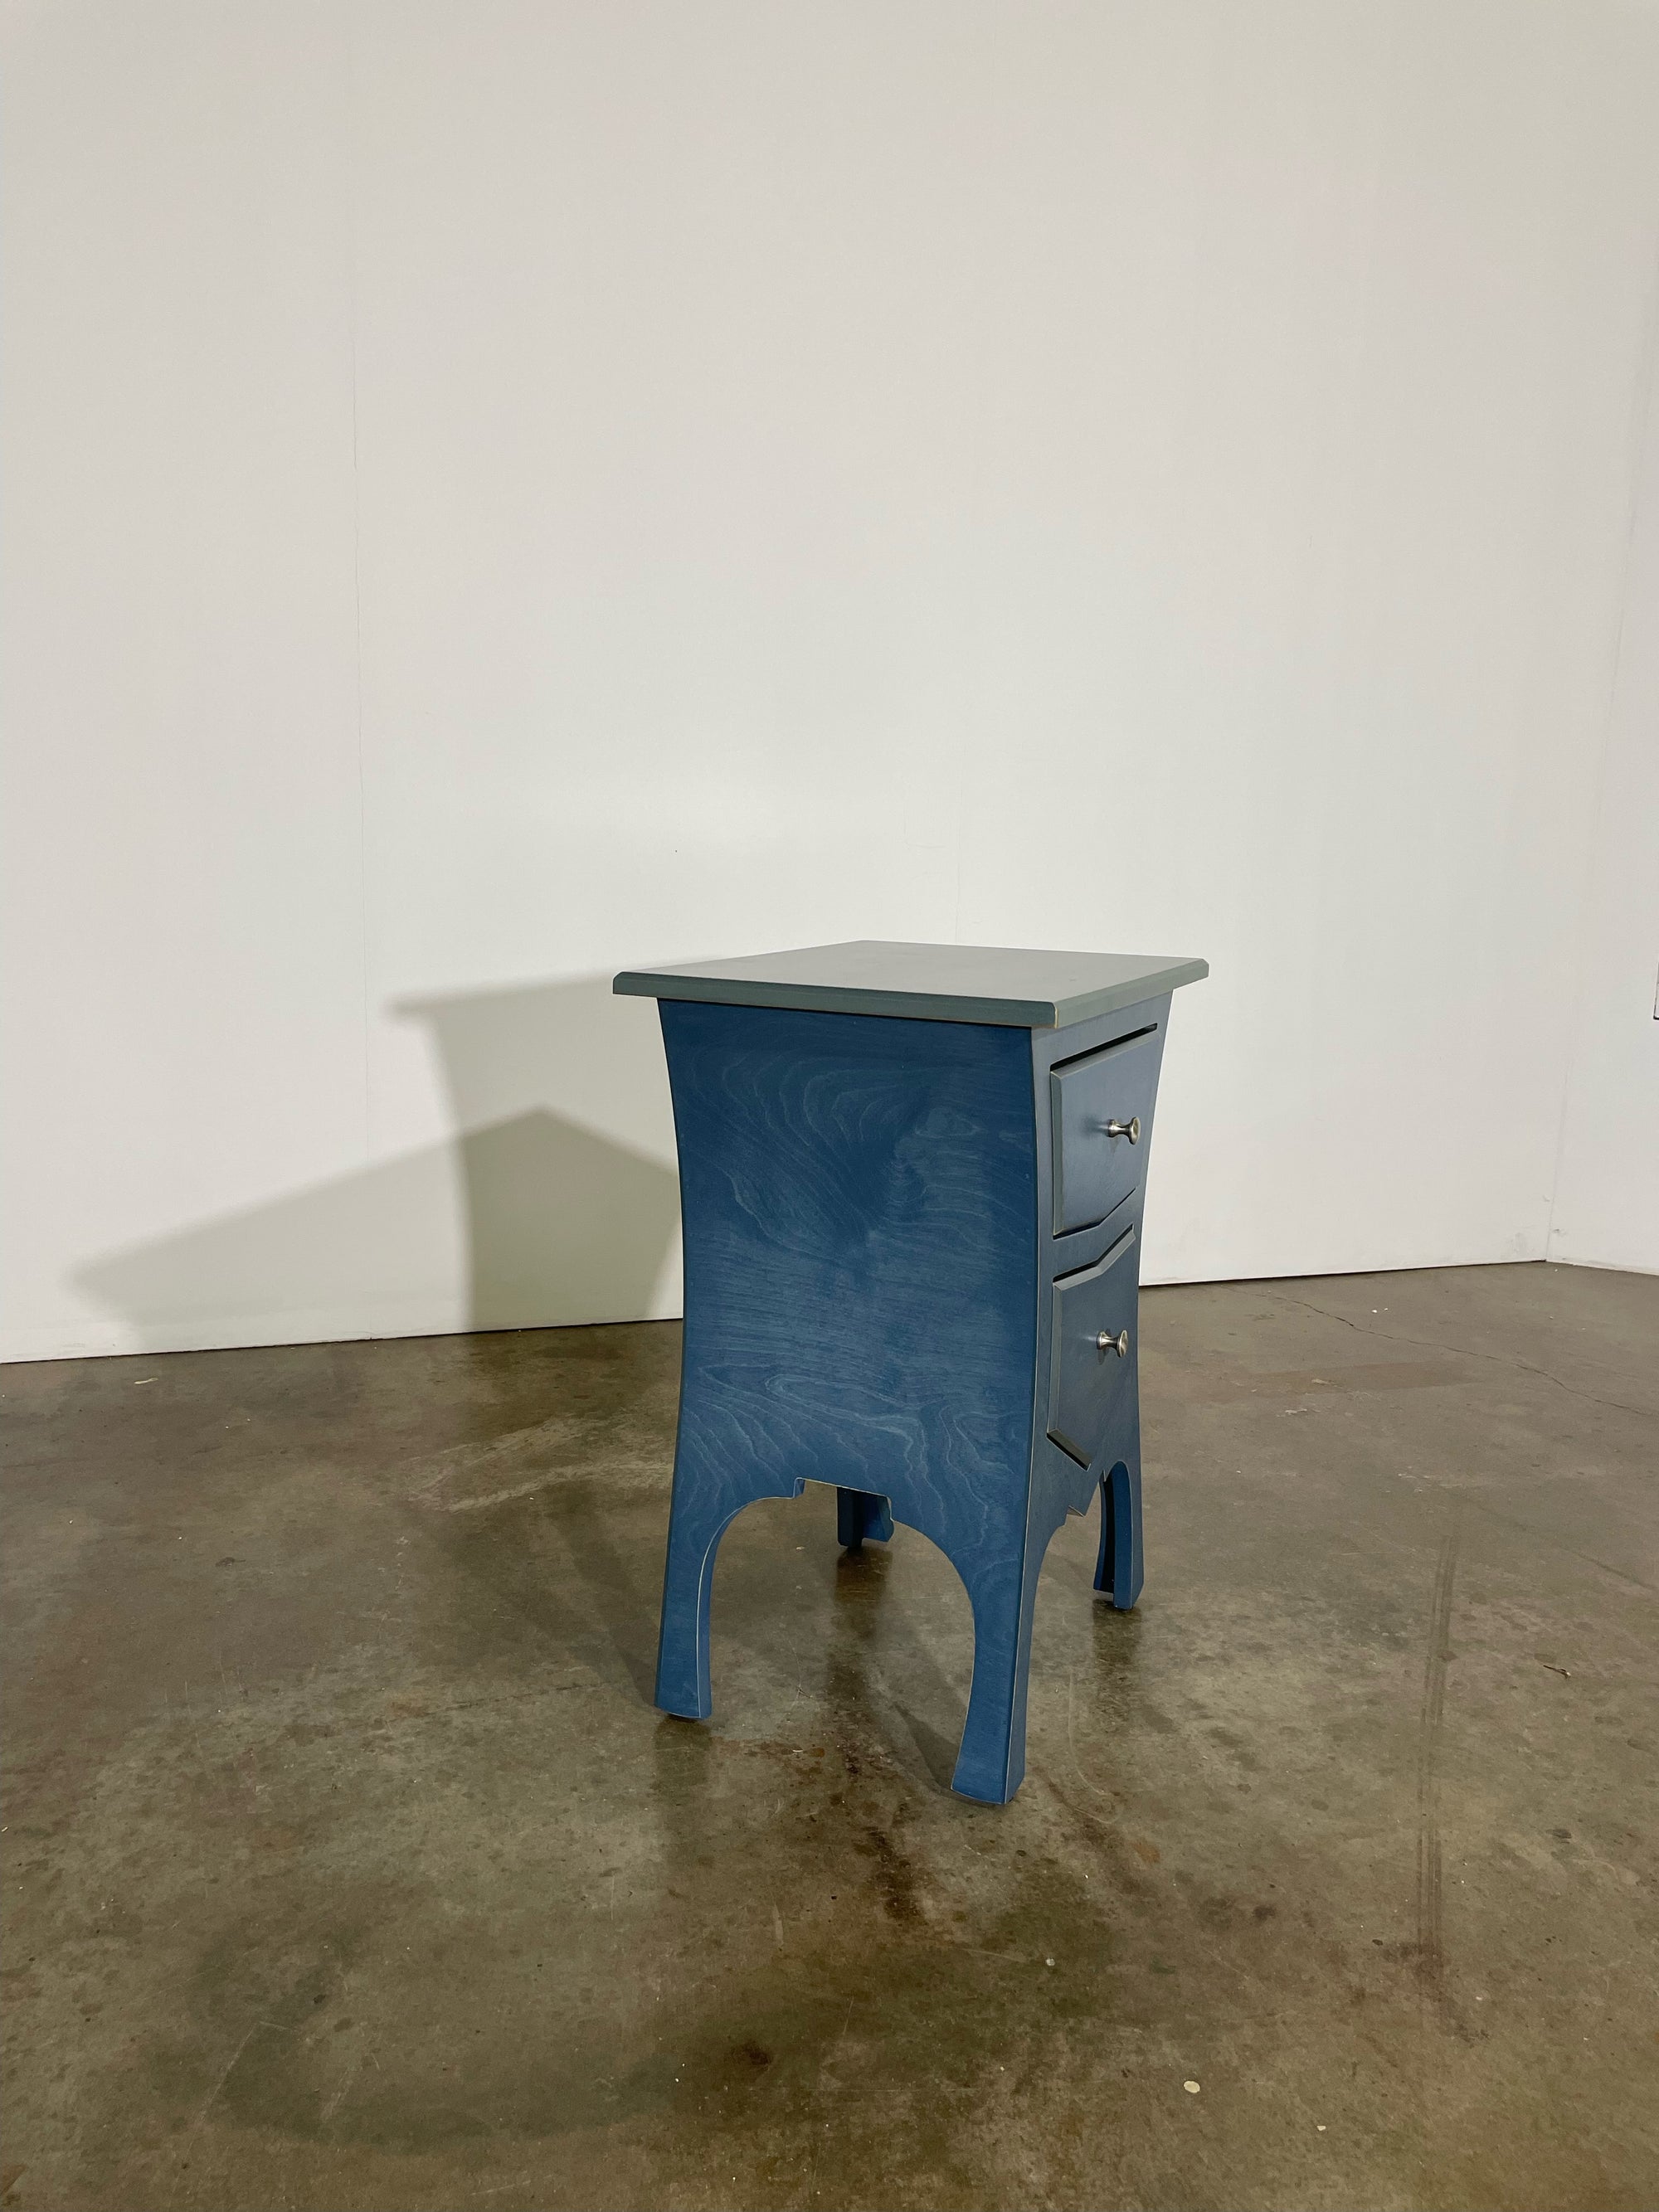 *SALE* - TABLE NO. 8 - SIDE TABLE/NIGHT STAND- IN INDIGO STAIN